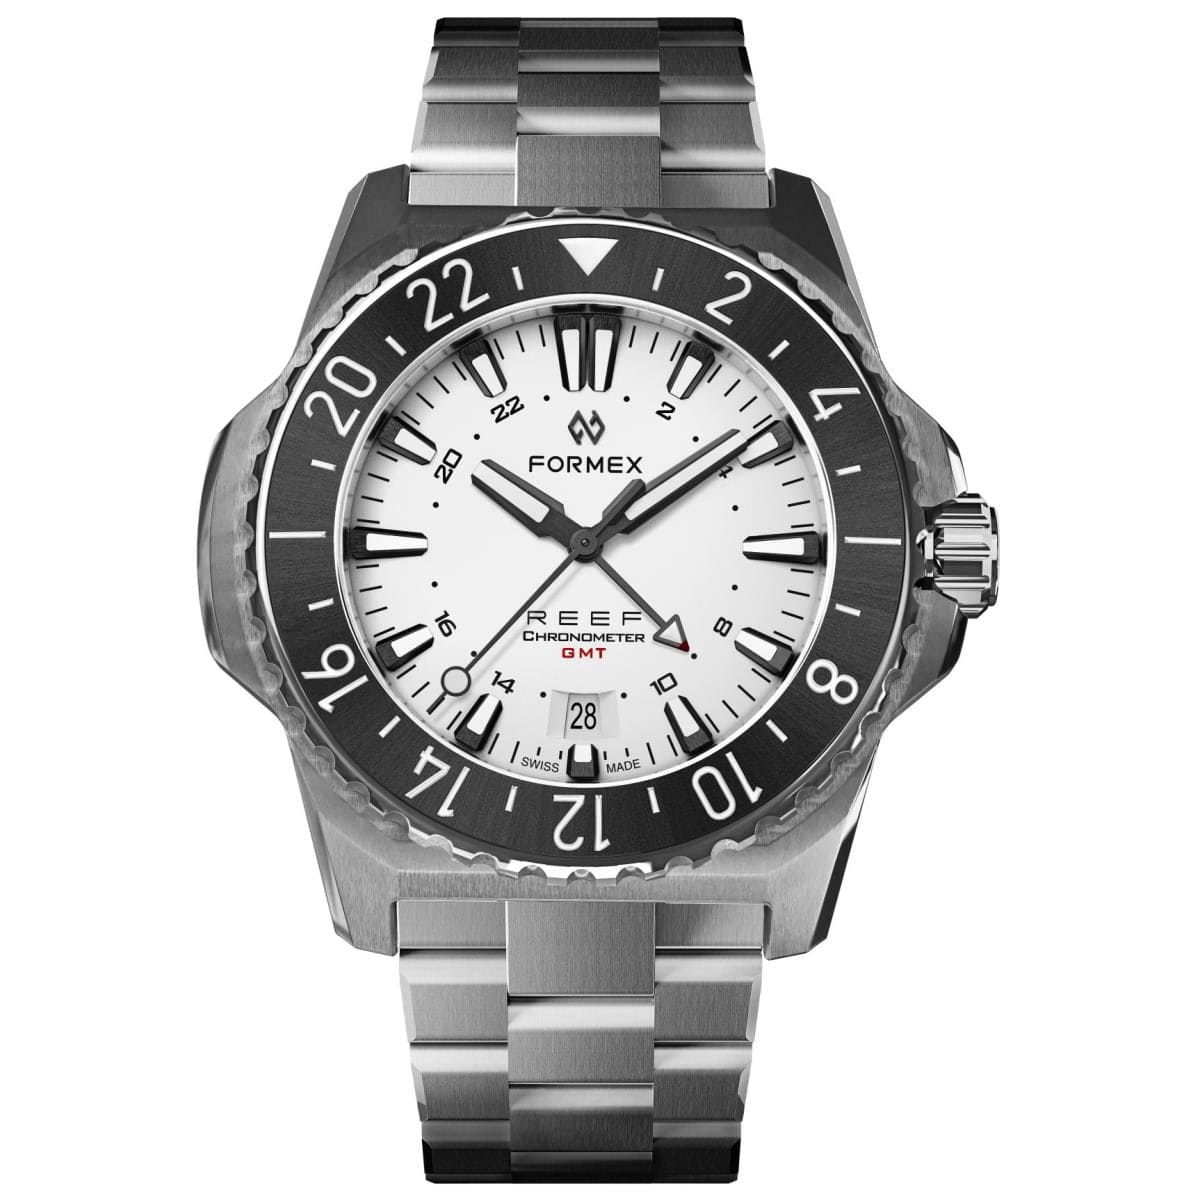 FORMEX REEF GMT - White Dial - Stainless Steel Bracelet